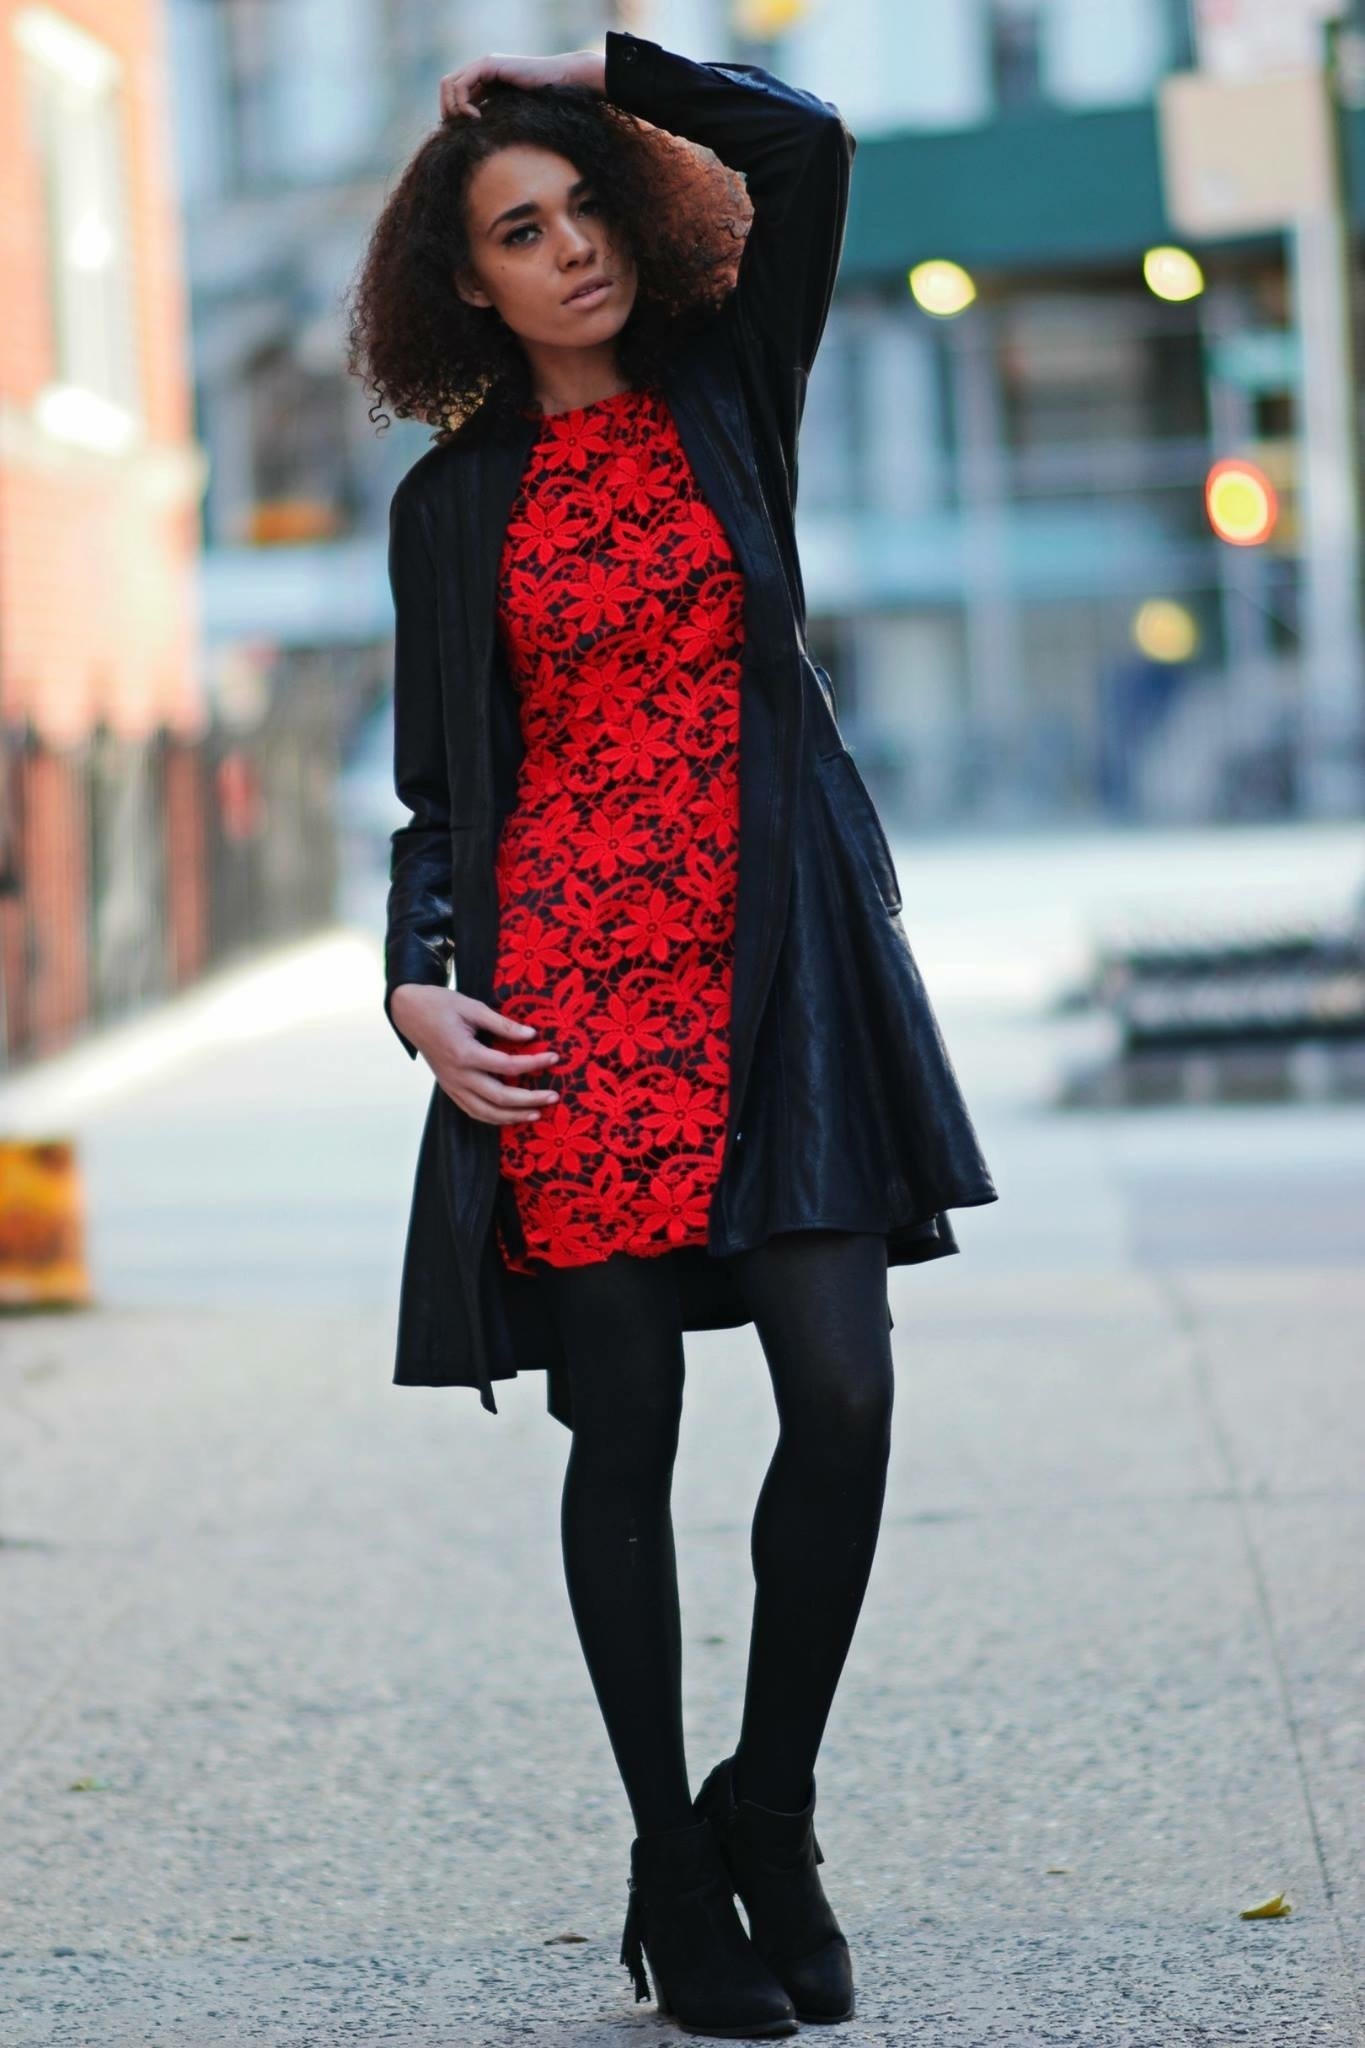 Holiday Style #red #dress #black #belt #leggings #booties #boots #gold  #clutch #christmas #holiday